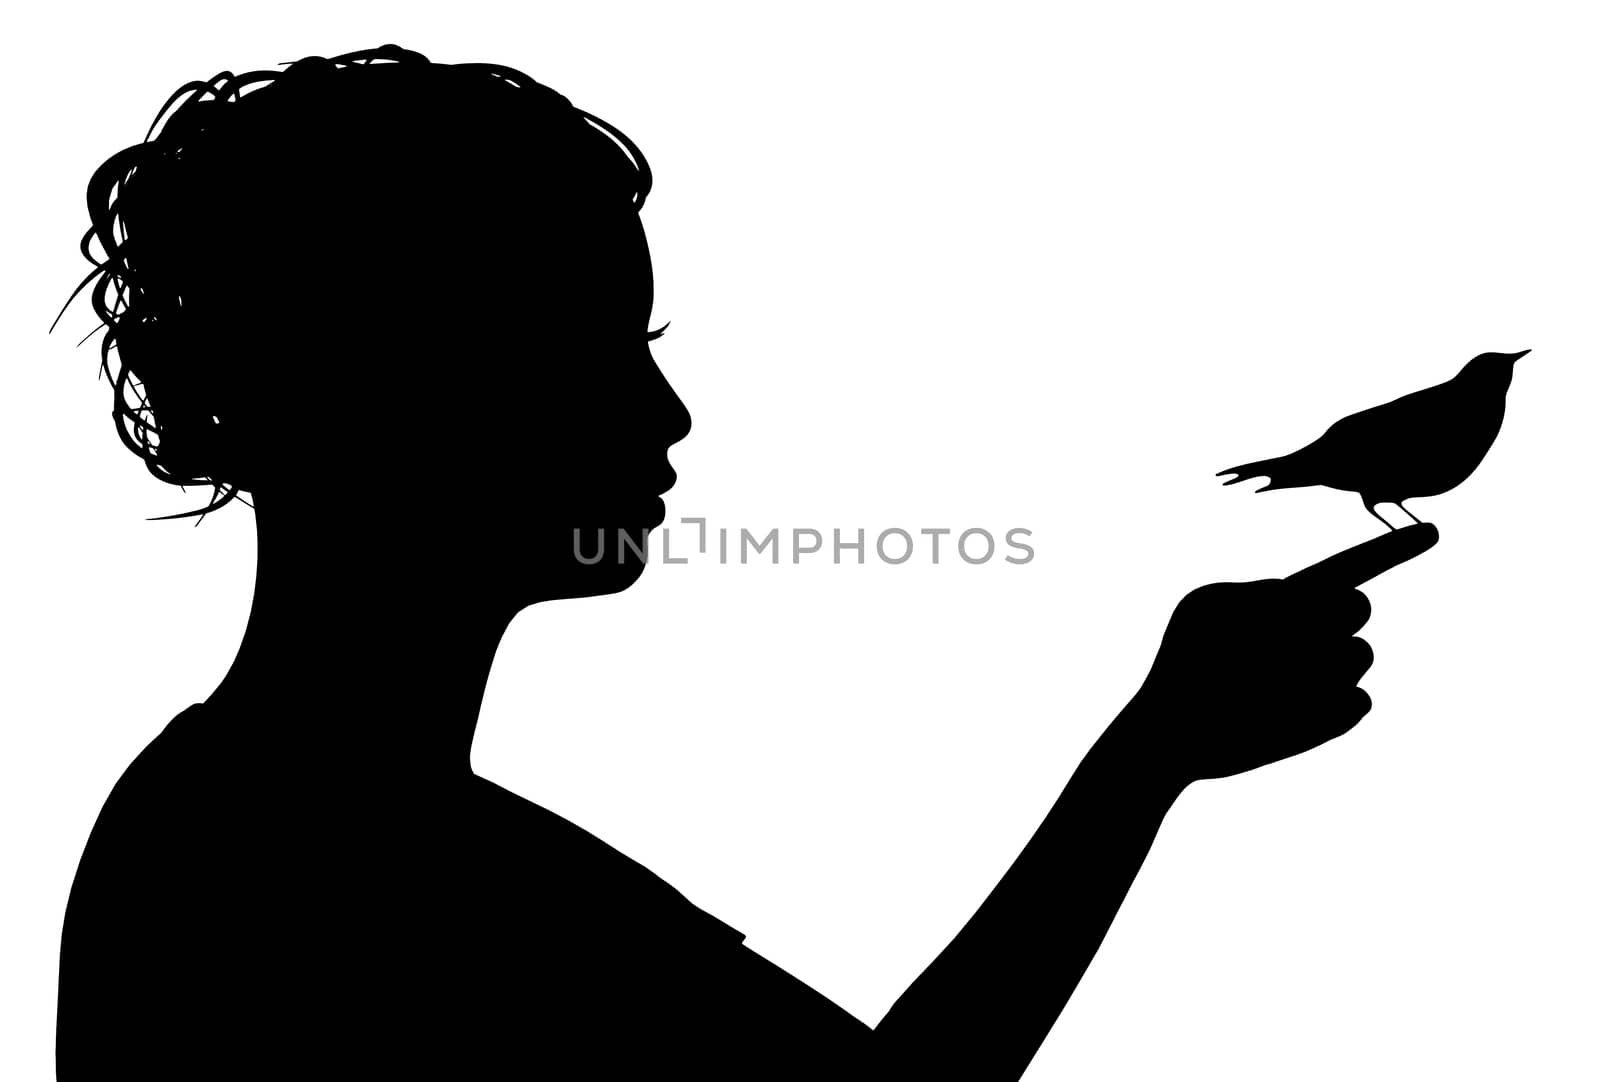 Illustration of a woman with a bird on her finger